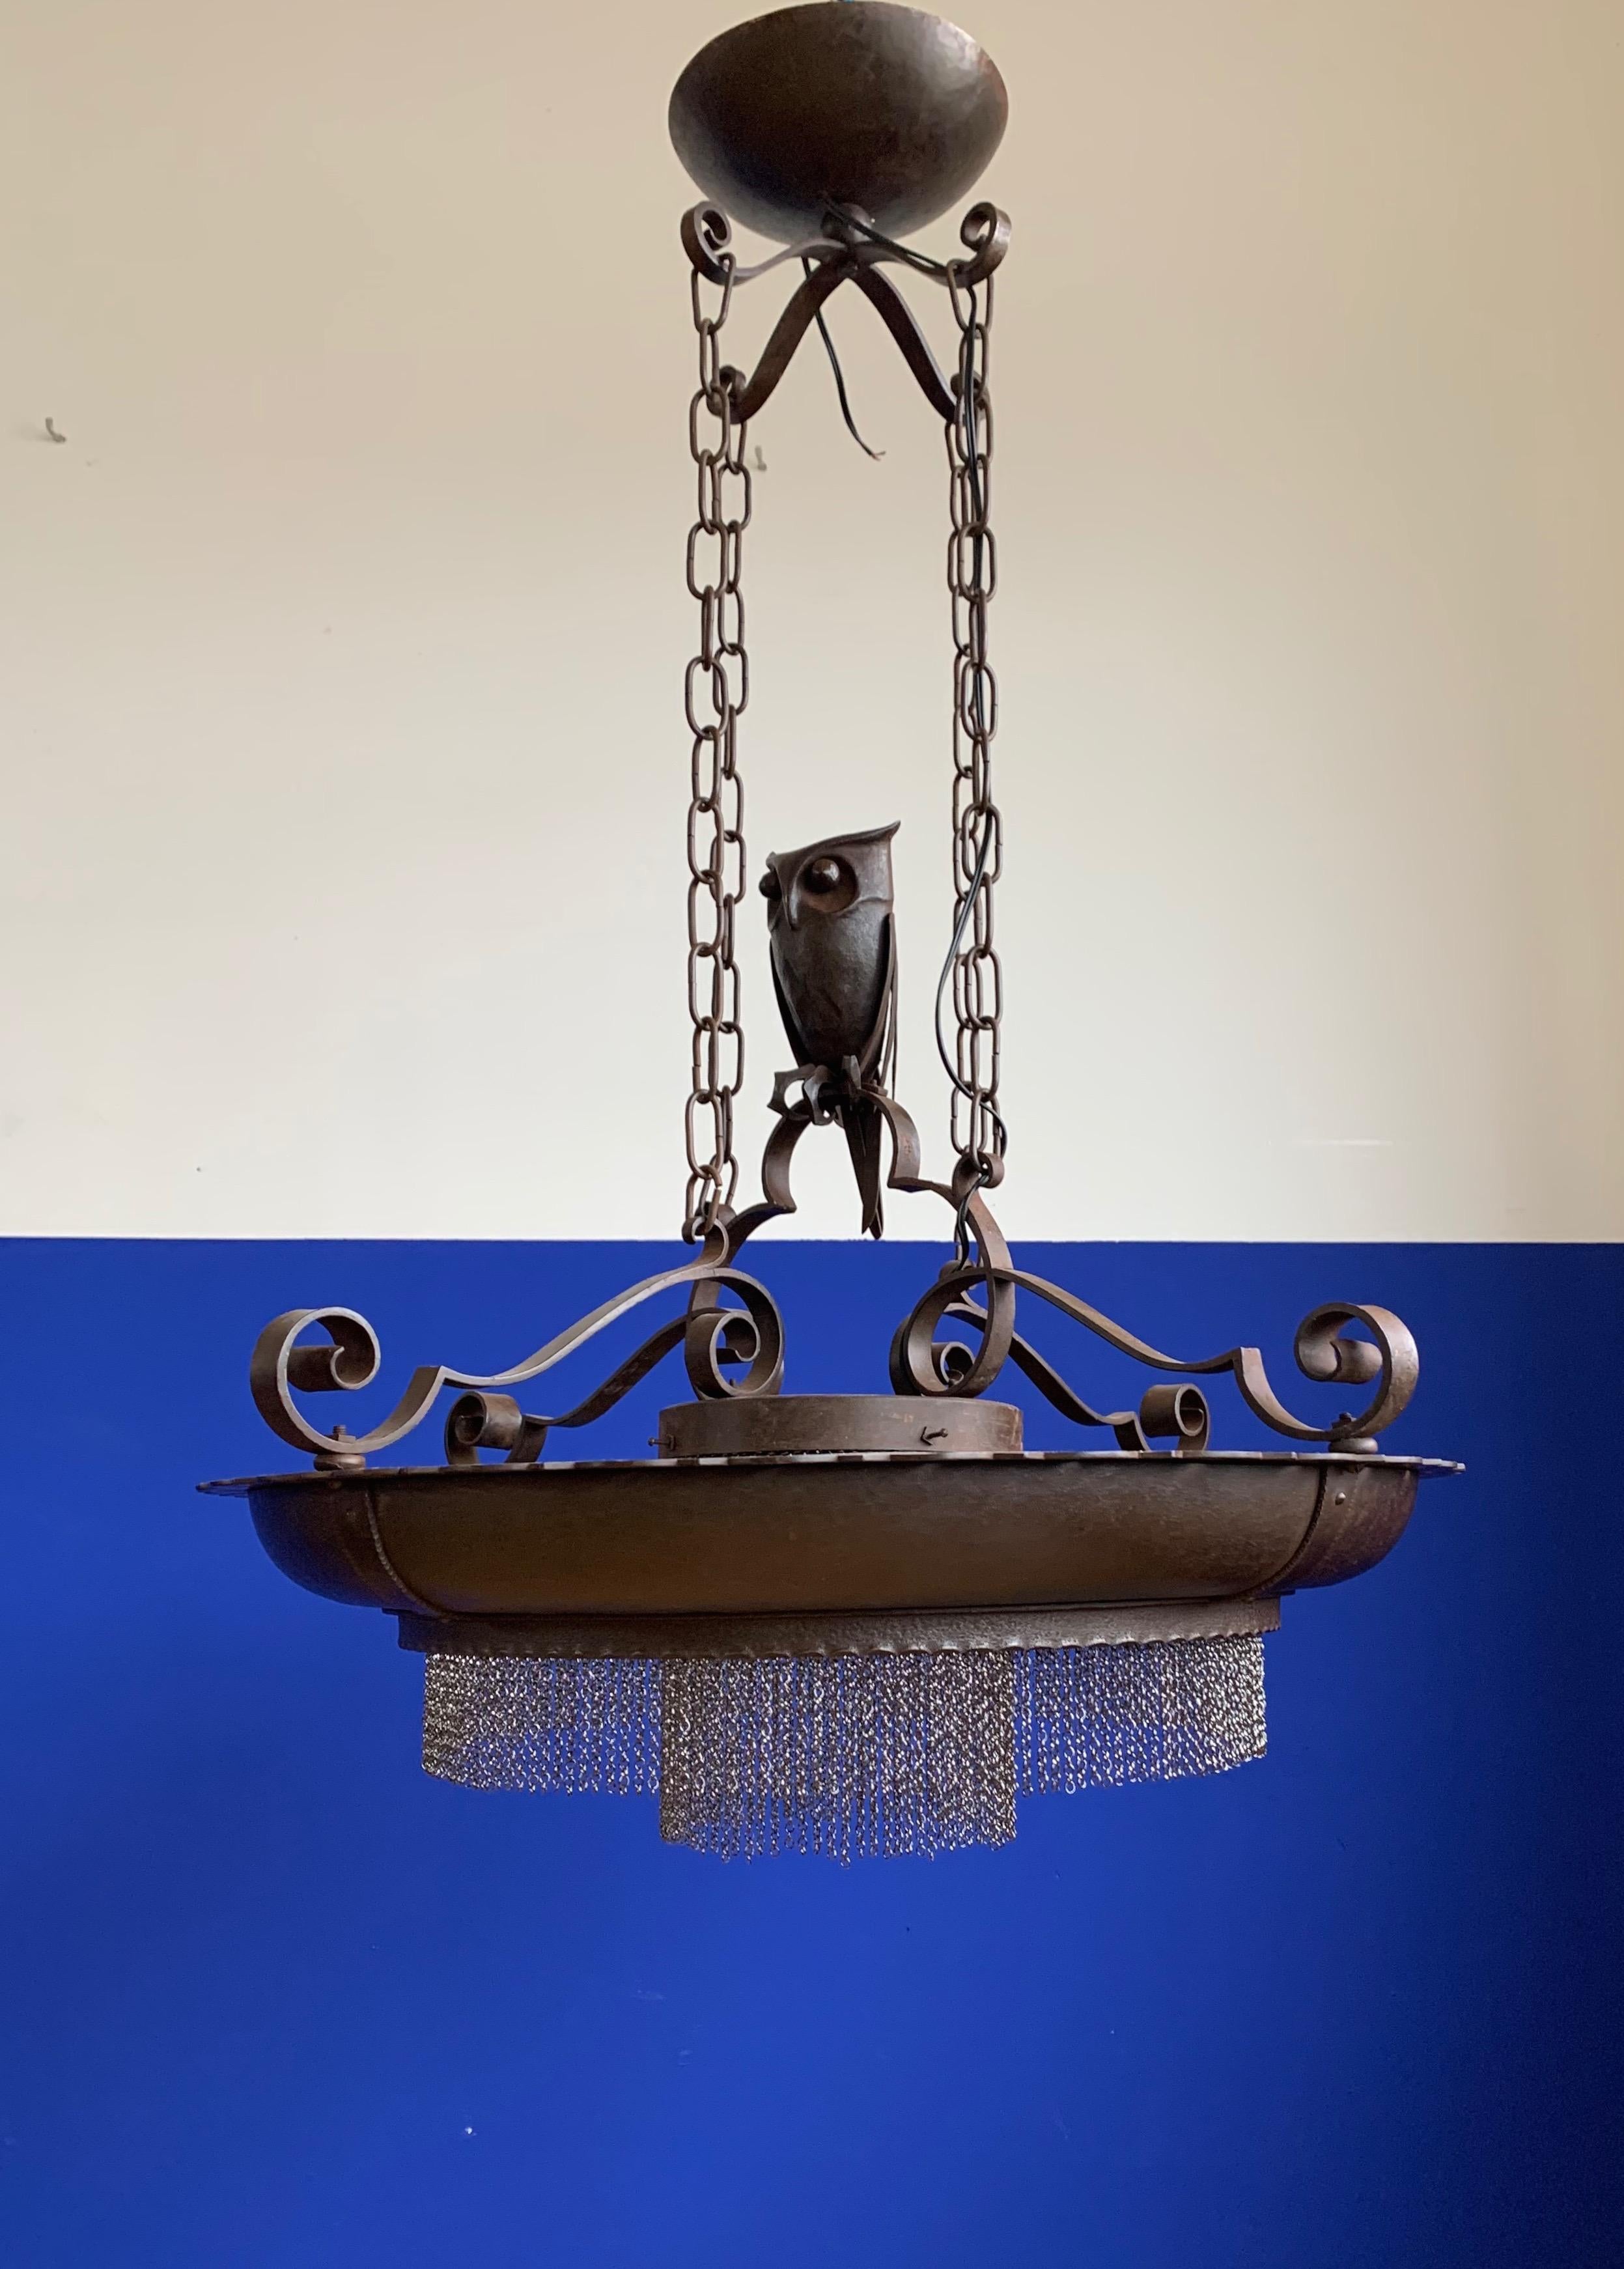 European Amazing Arts and Crafts Wrought Iron Chandelier with Owl Sculpture, early 1900s